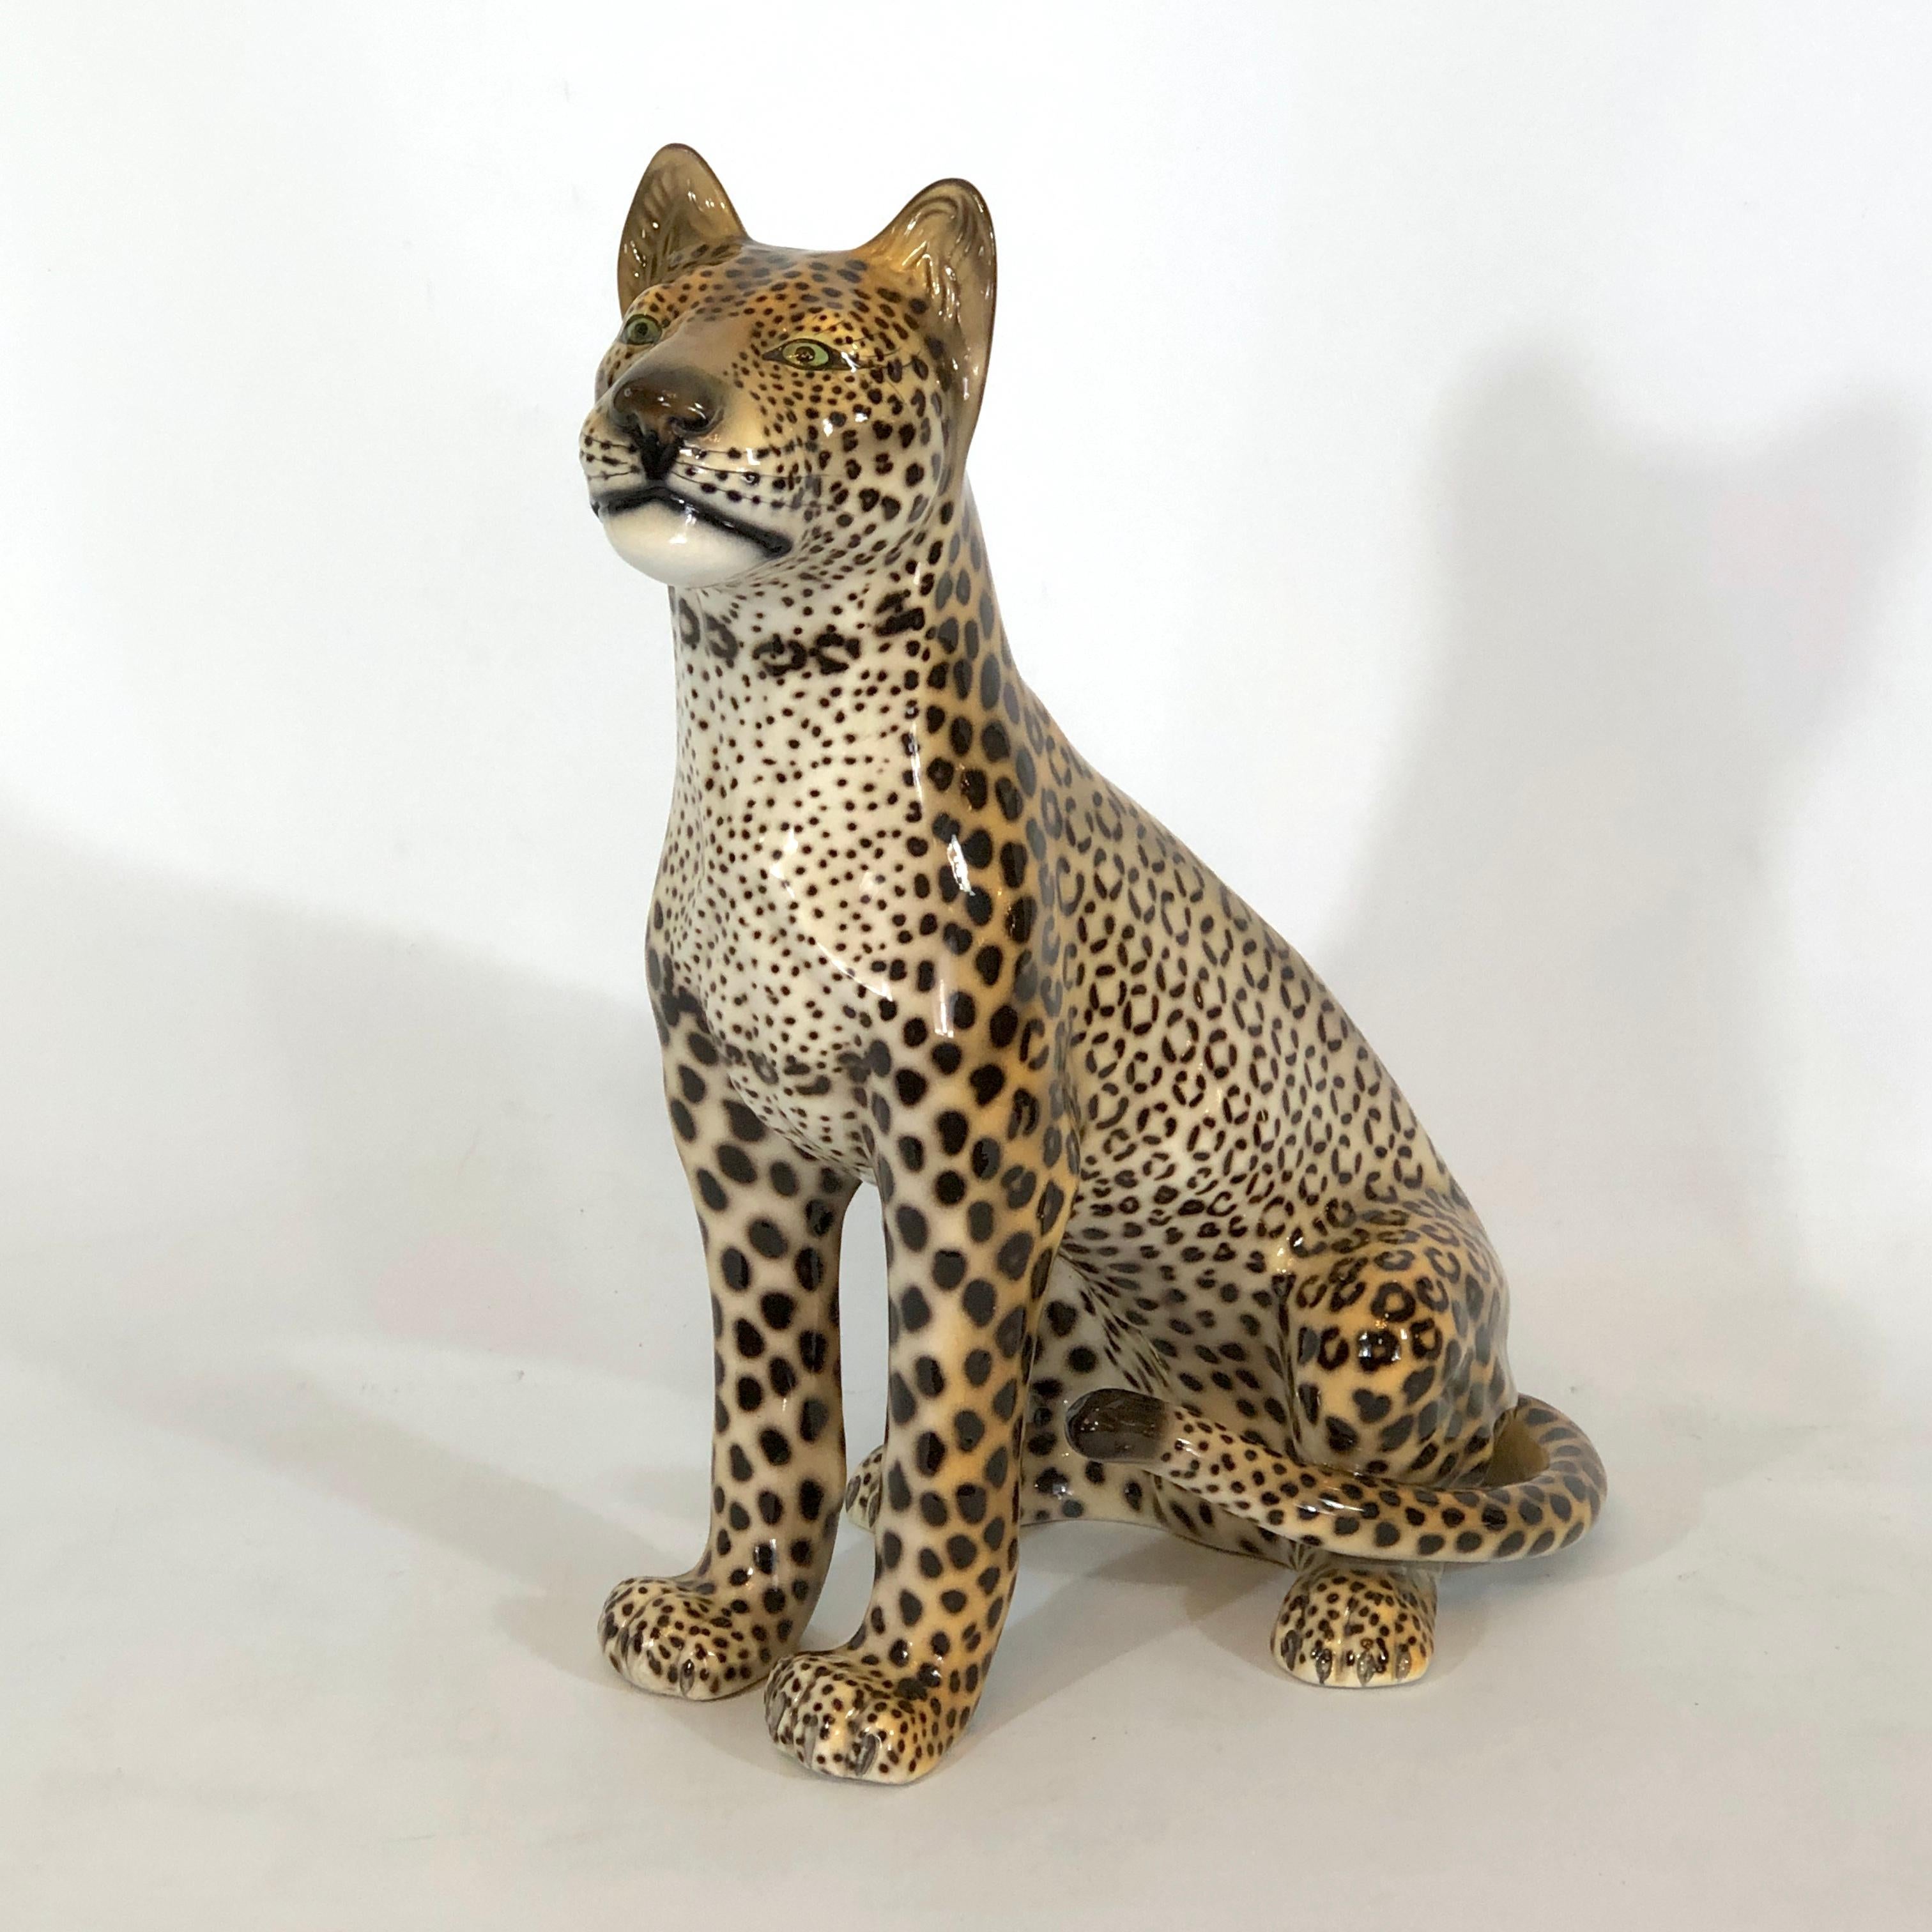 Great vintage condition for this sculptural hand painted ceramic Leopard, made in Italy during the 60s and signed by Favaro Cecchetto